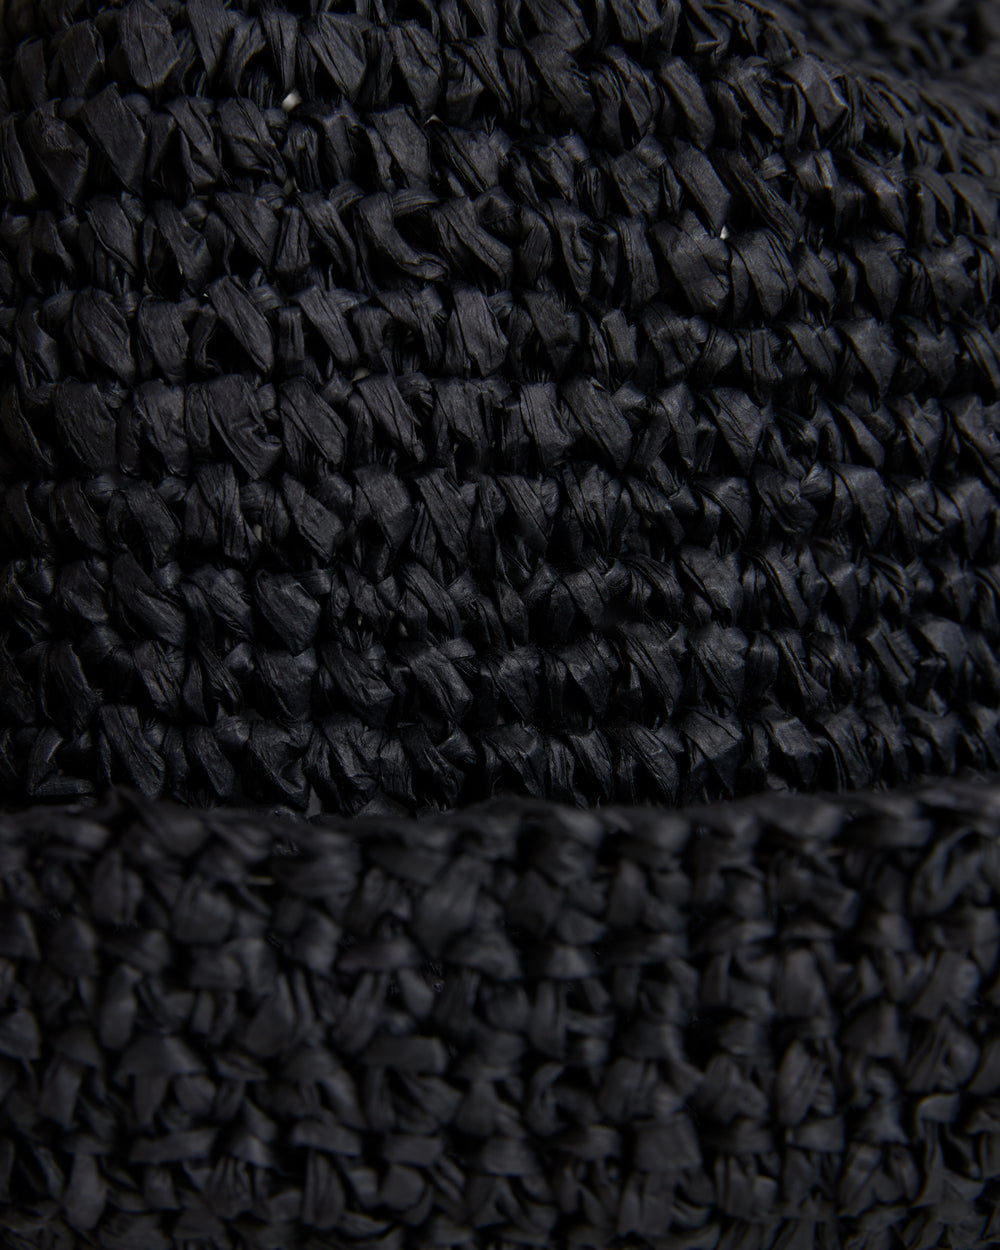 Close-up of The Amabile Rafia Hat - Onyx from Dandy Del Mar, a textured black fabric with a detailed woven pattern, highlighting the intricate threads and fibers.